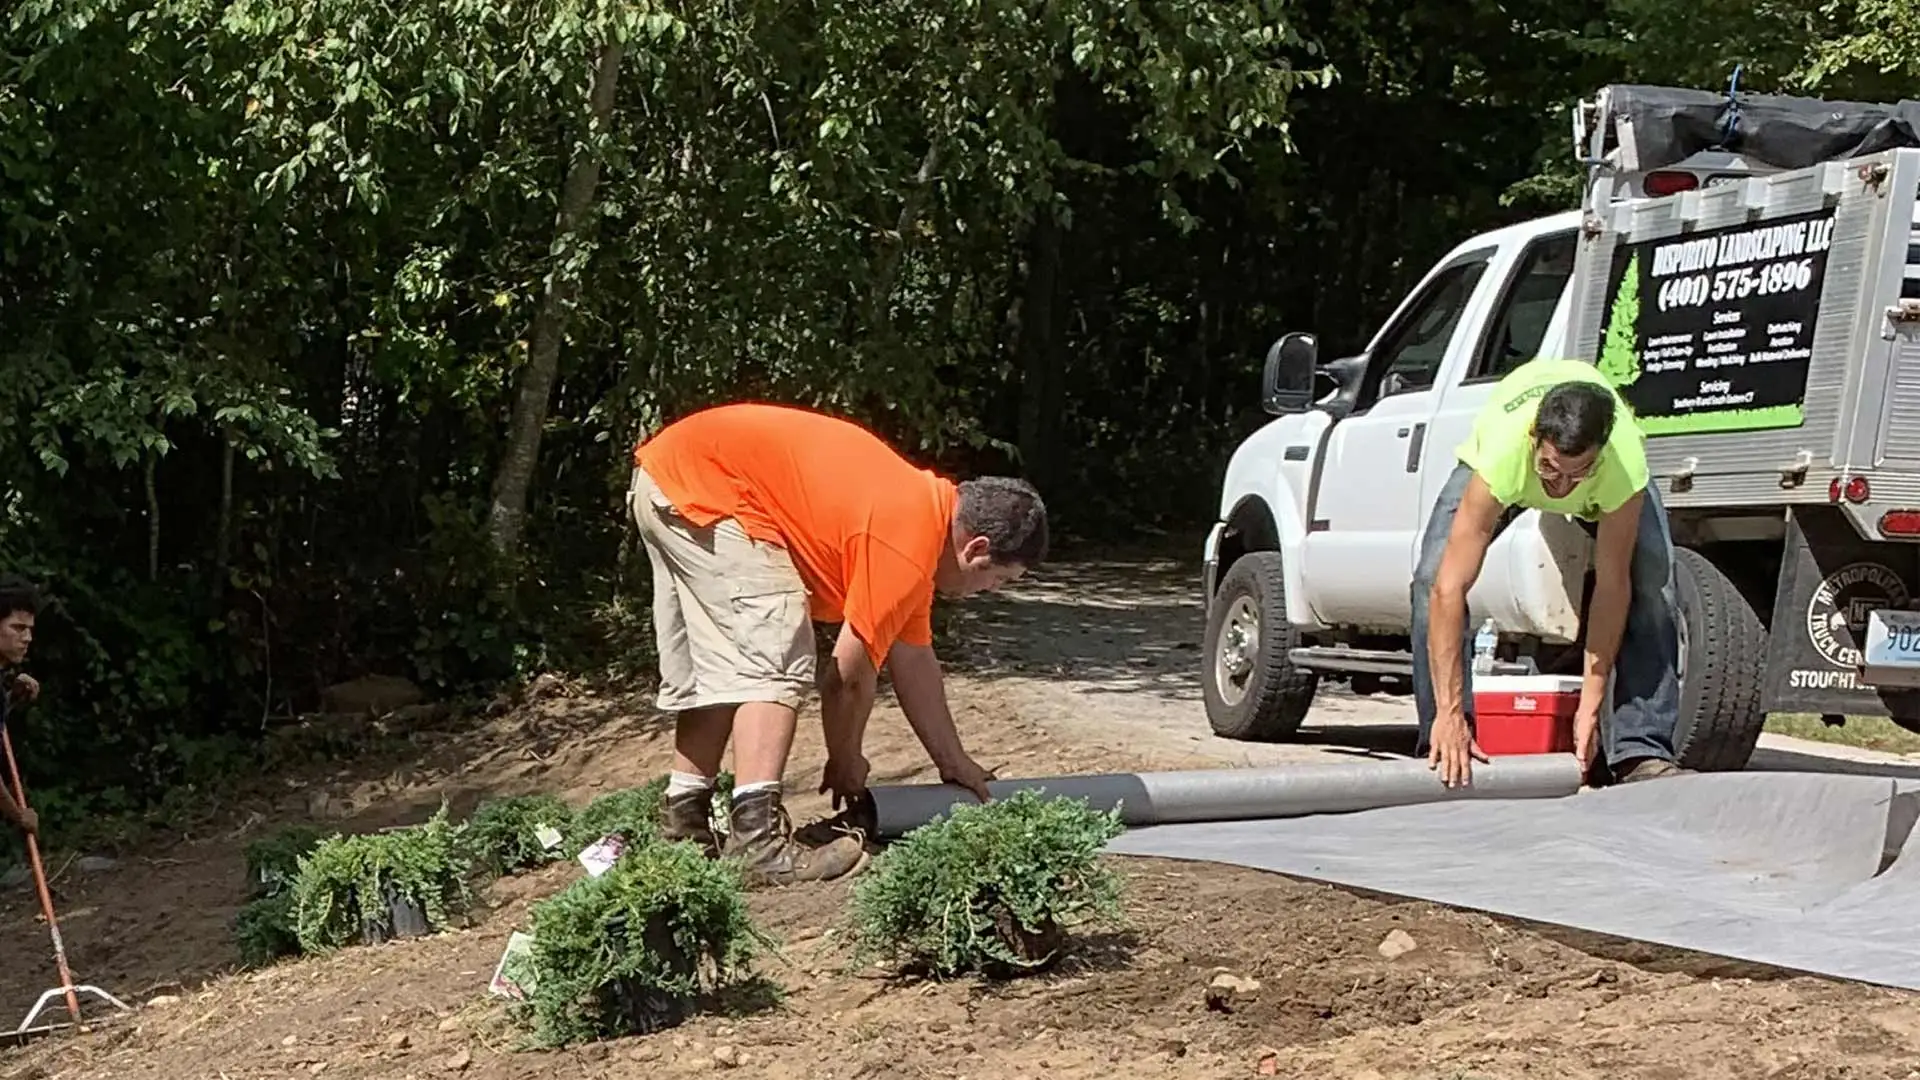 DiSpirito Landscaping LLC employees working on landscaping projects in Westerly, RI.